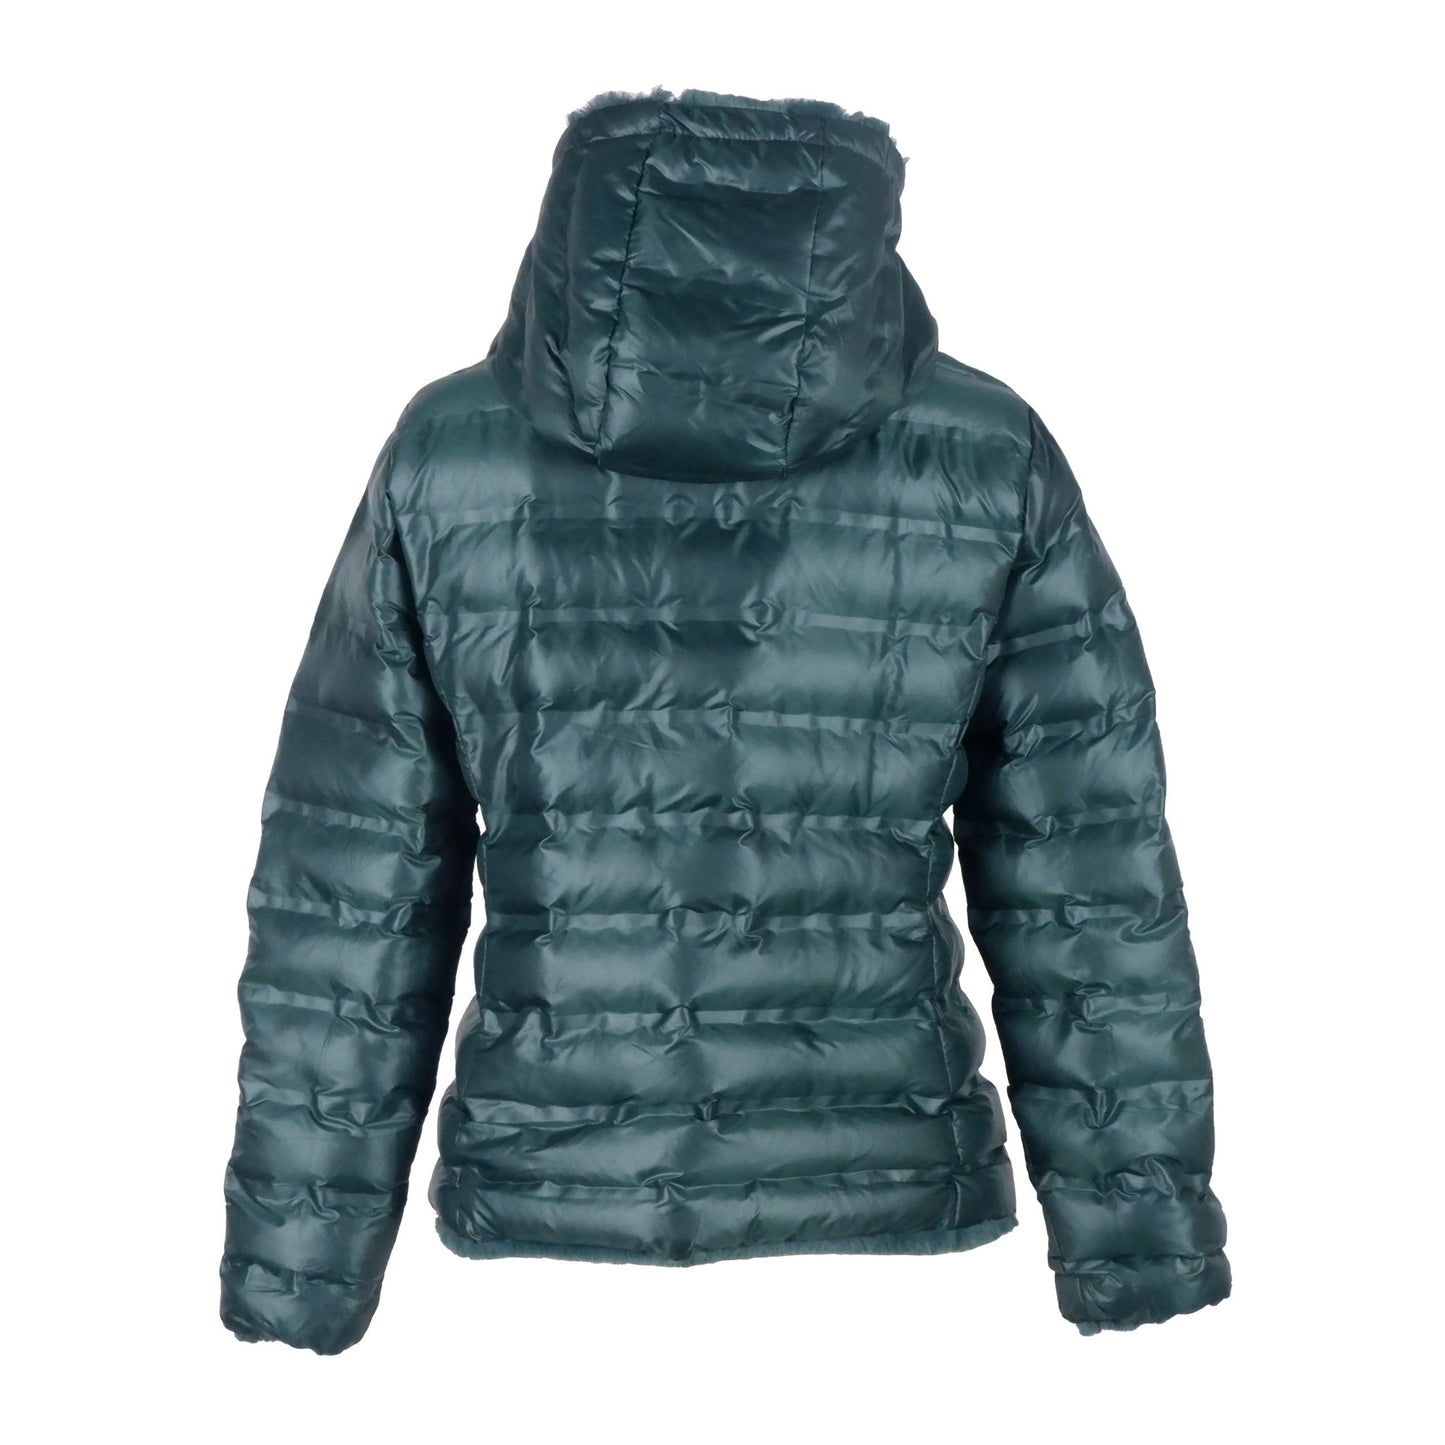 Reversible Hooded Down Jacket in Lush Green